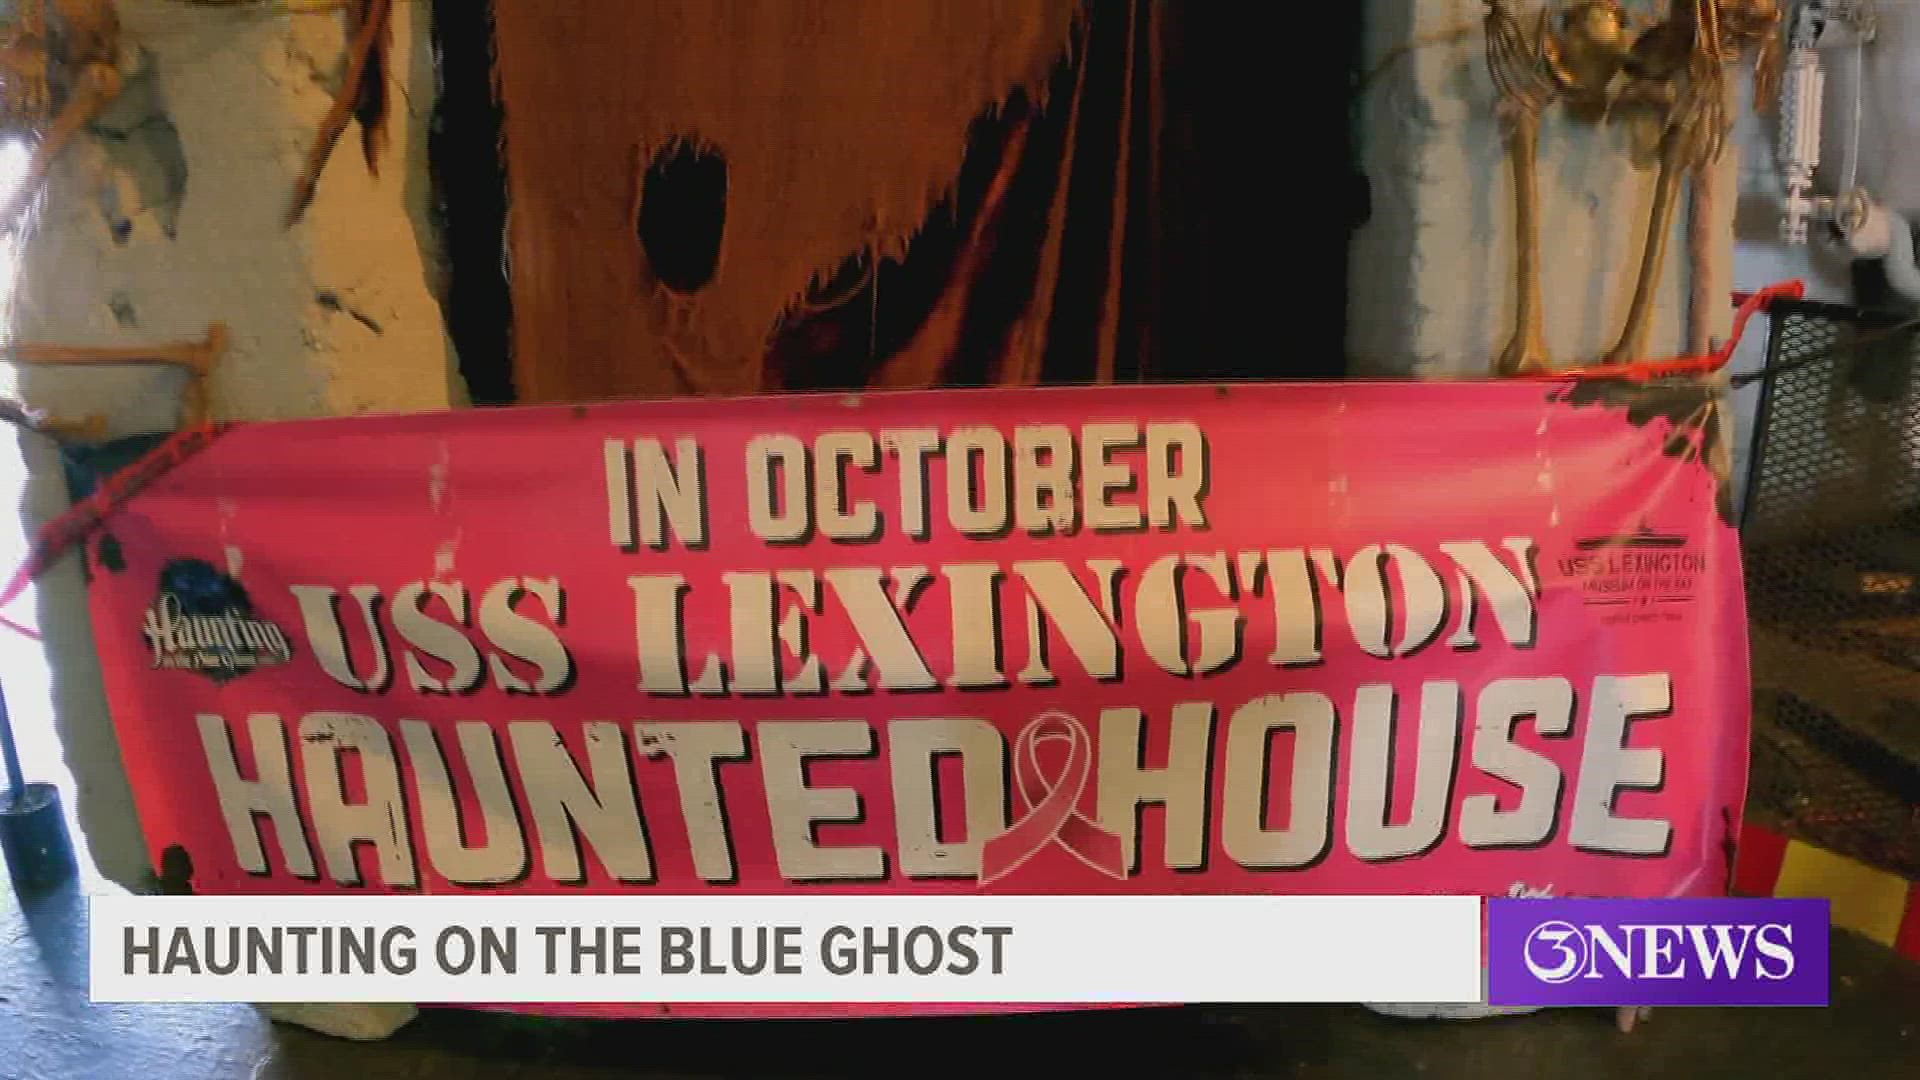 This year's "Haunting on the Blue Ghost" returns to show that at sea, no one can hear you scream.